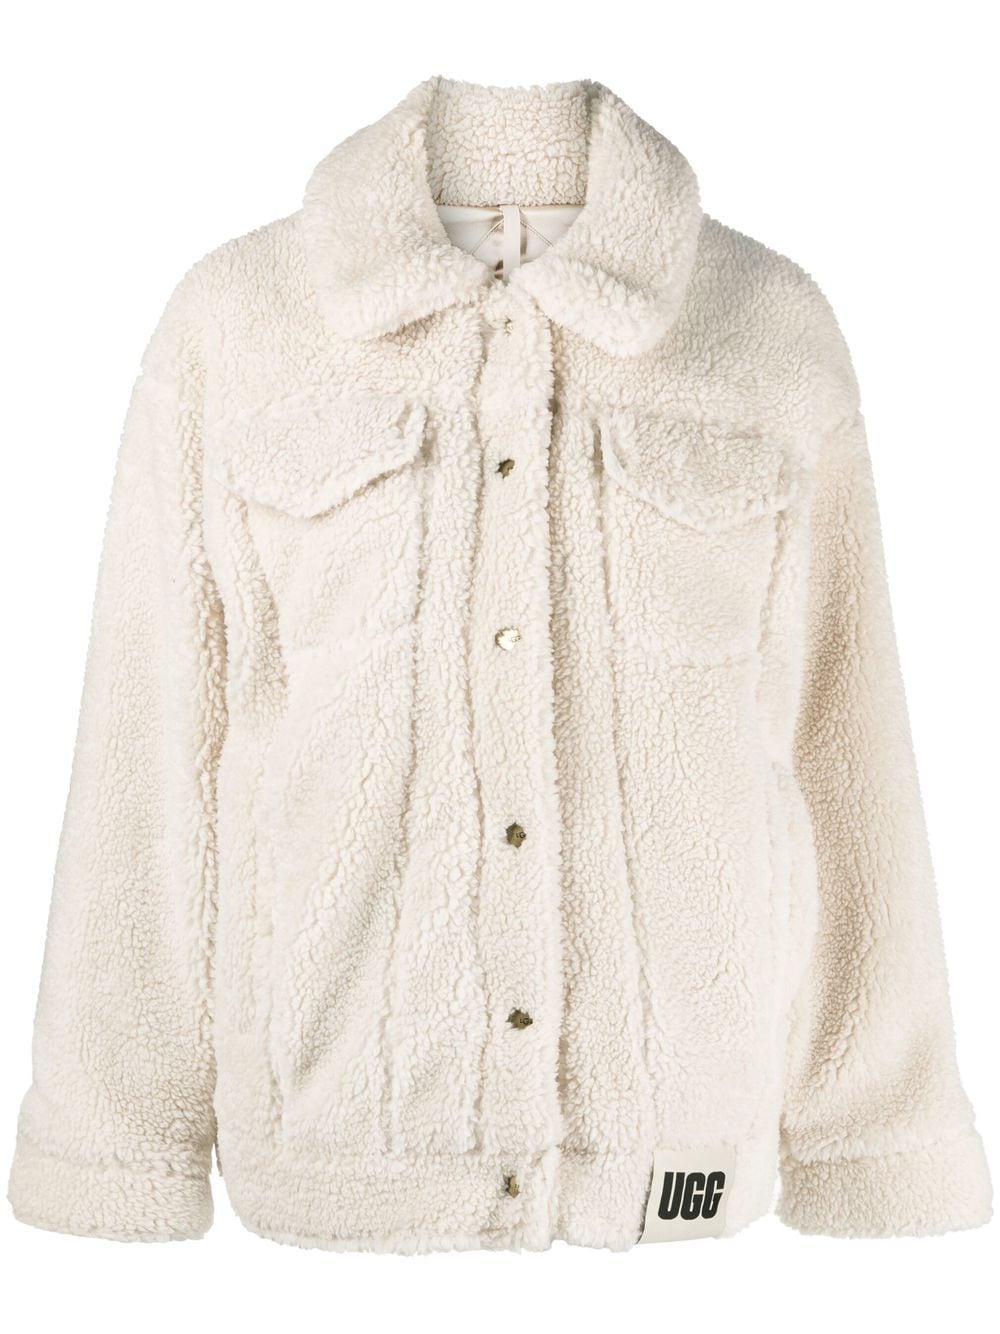 UGG BUTTON-UP FAUX SHEARLING JACKET